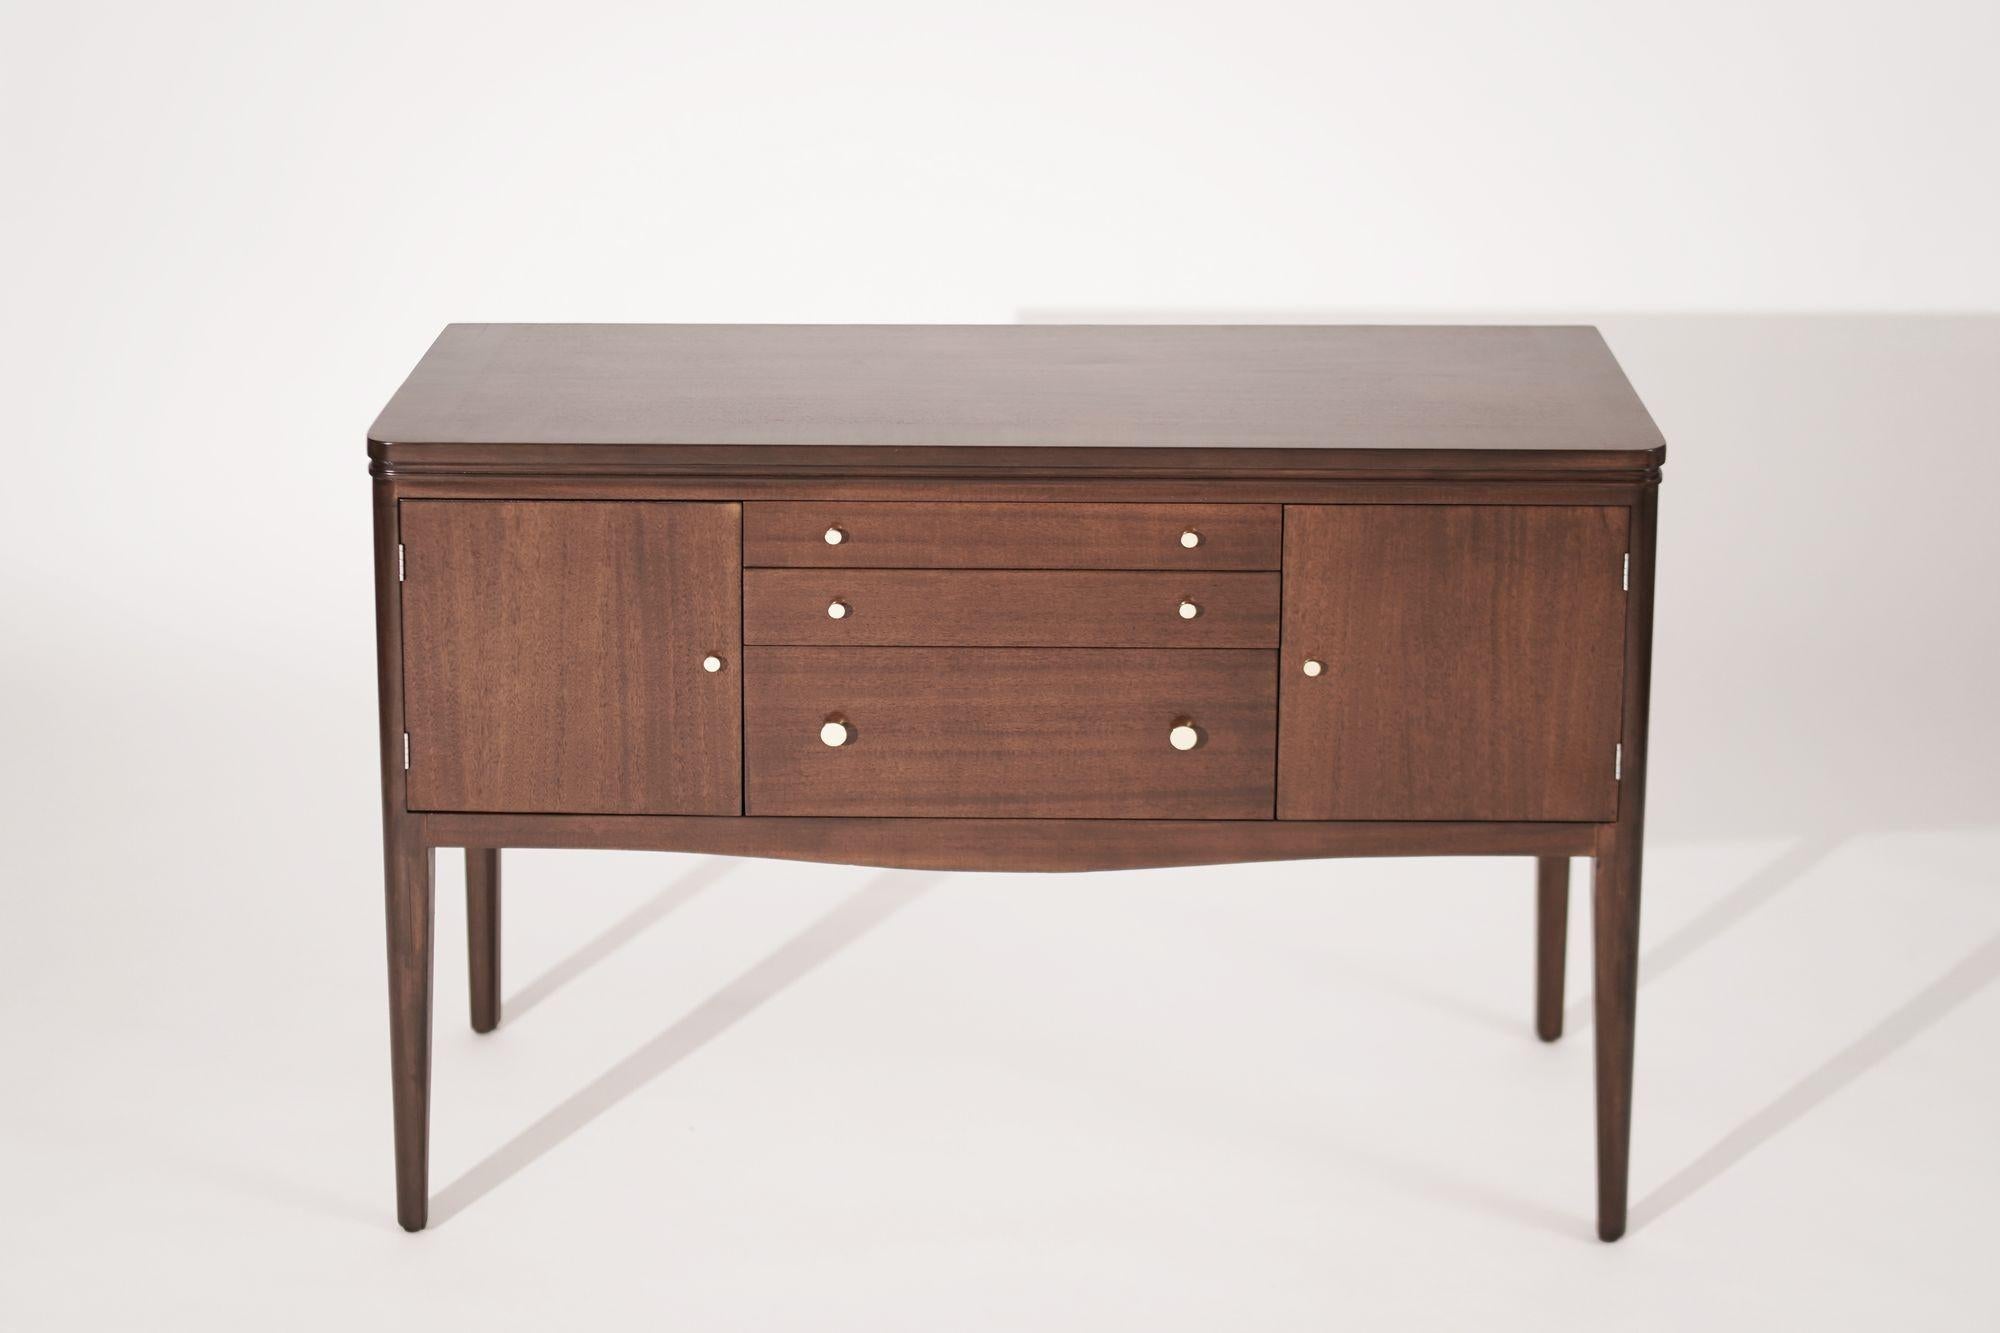 An outstanding console table executed in mahogany with brass hardware, three drawers, and side doors provide plenty of storage space. Completely restored. 
 
Other designers from this period include Paul McCobb, Paul Frankl, Jens Risom, and T.H.